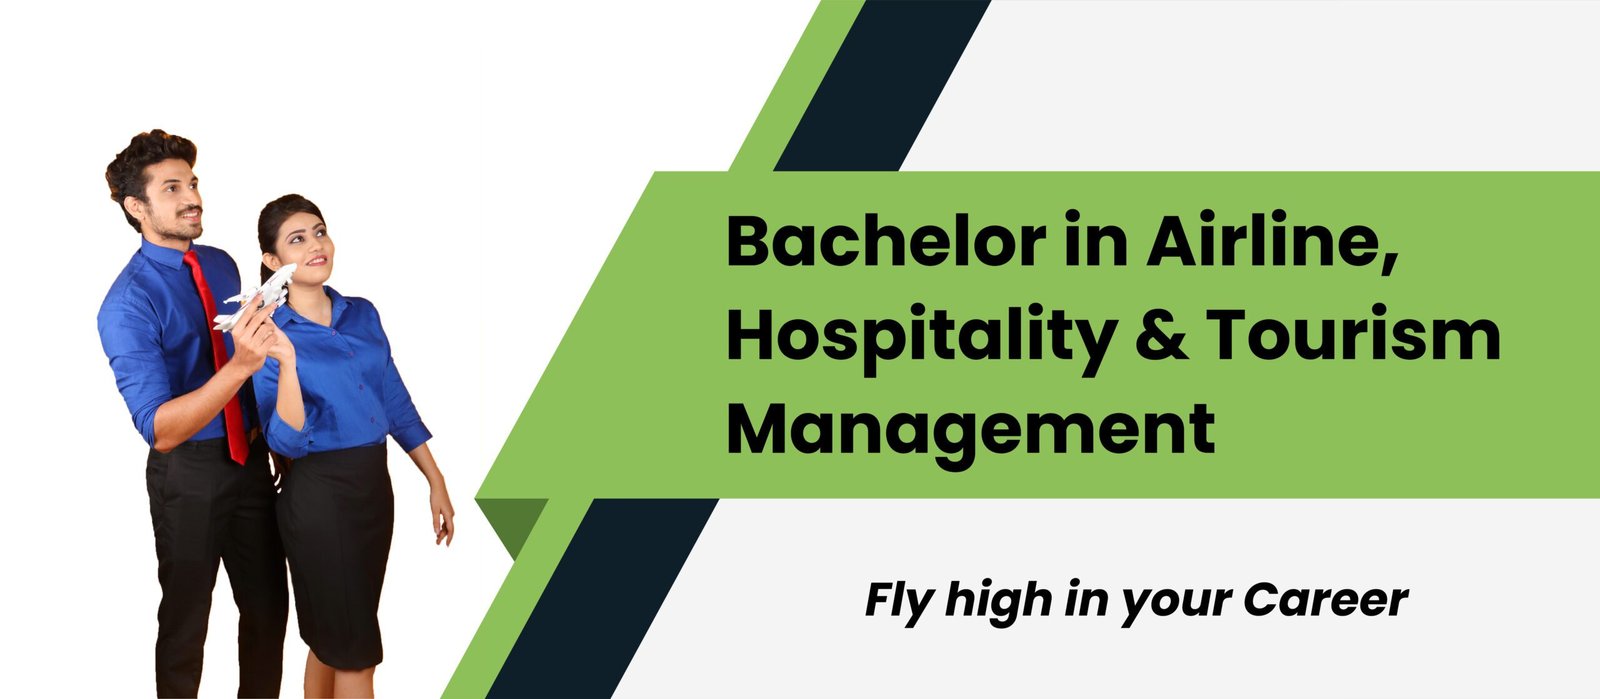 Bachelor in Airlines, Hospitality & Tourism Management (BAHTM)